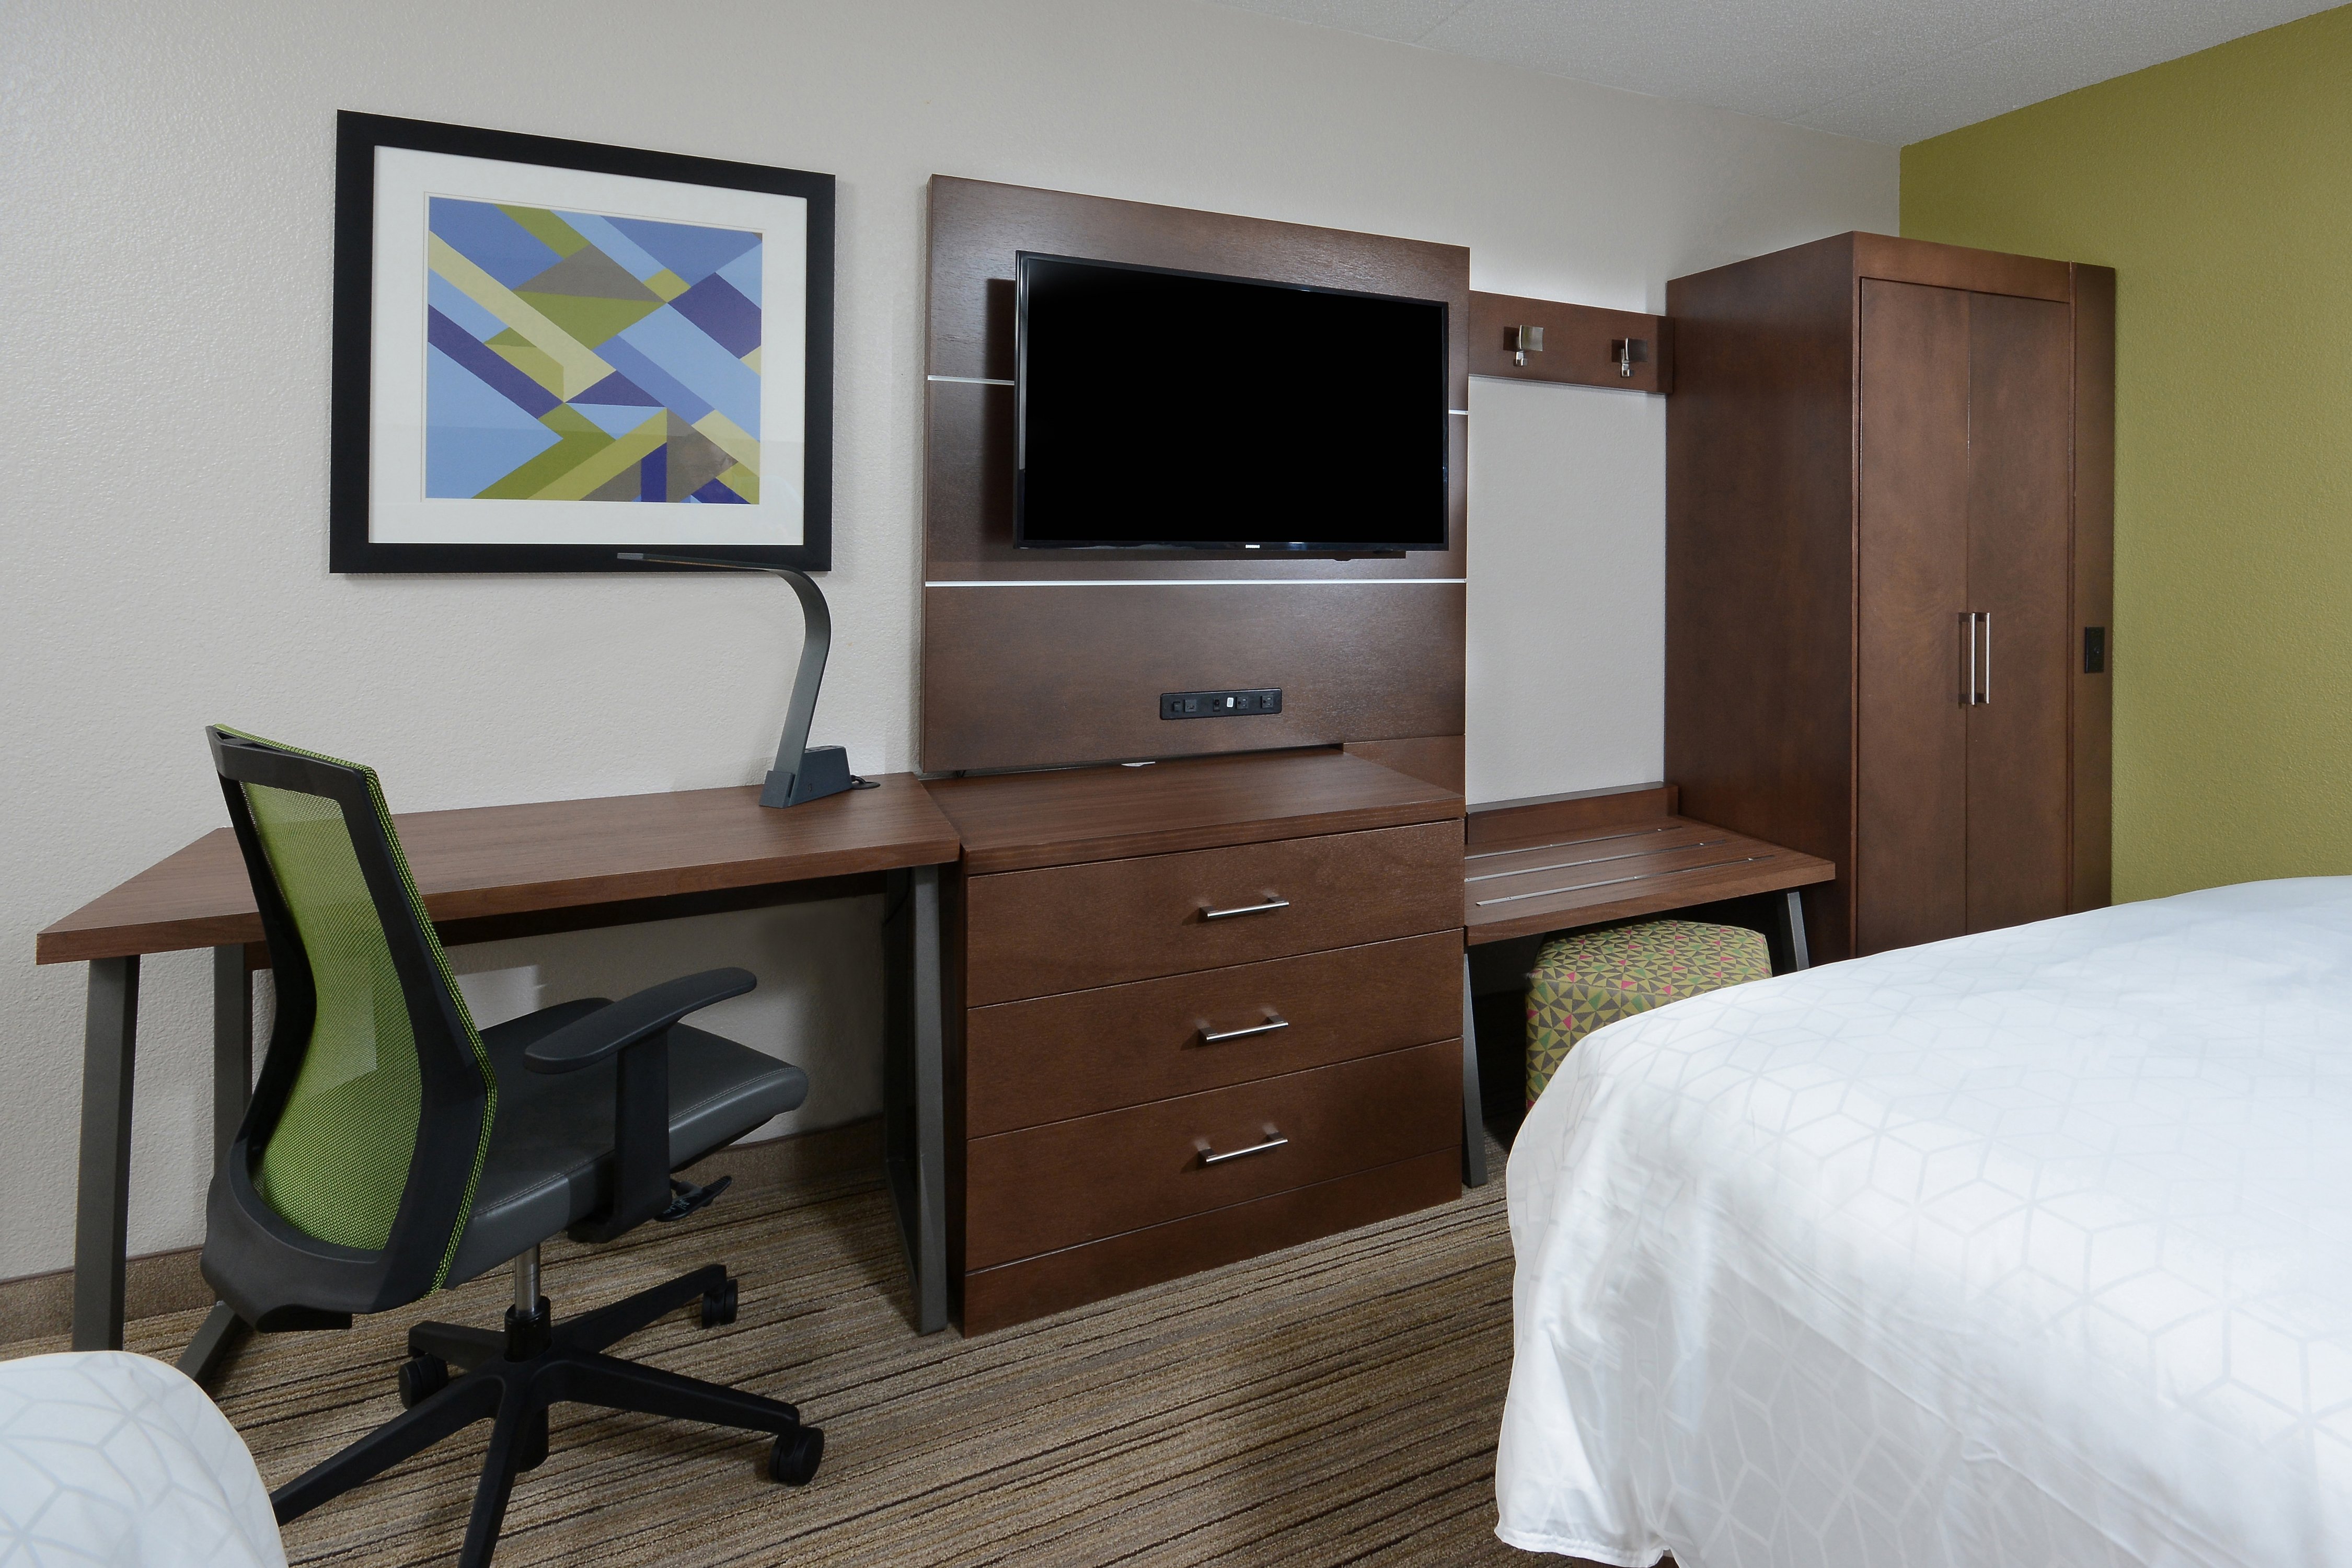 There's amples storage and plenty of workspace in our hotel rooms.